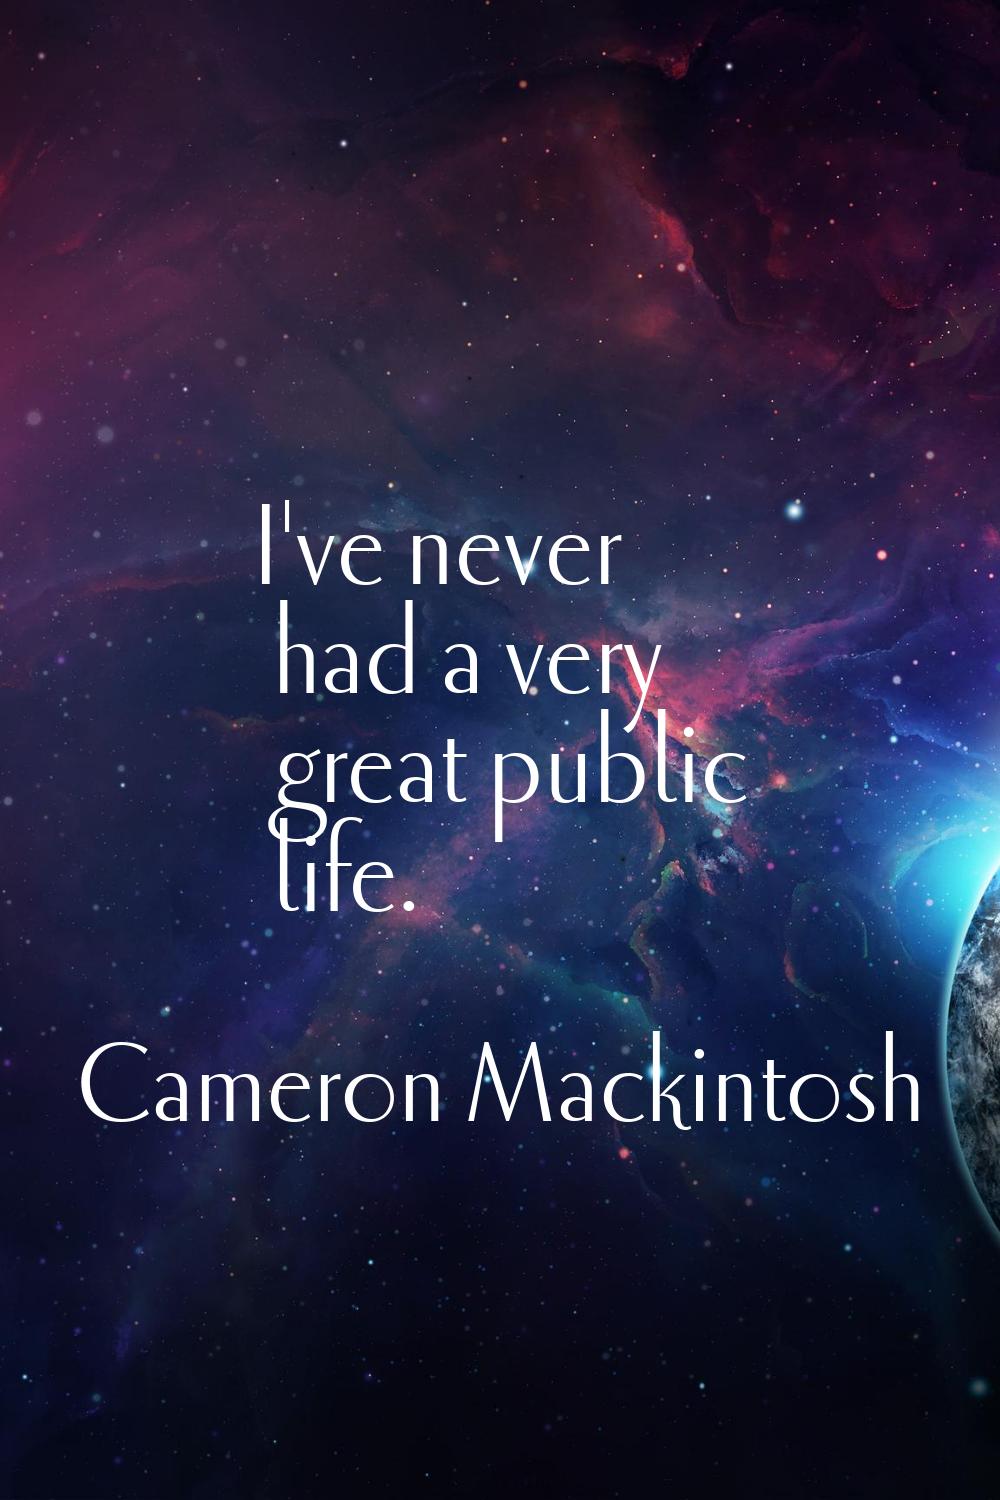 I've never had a very great public life.